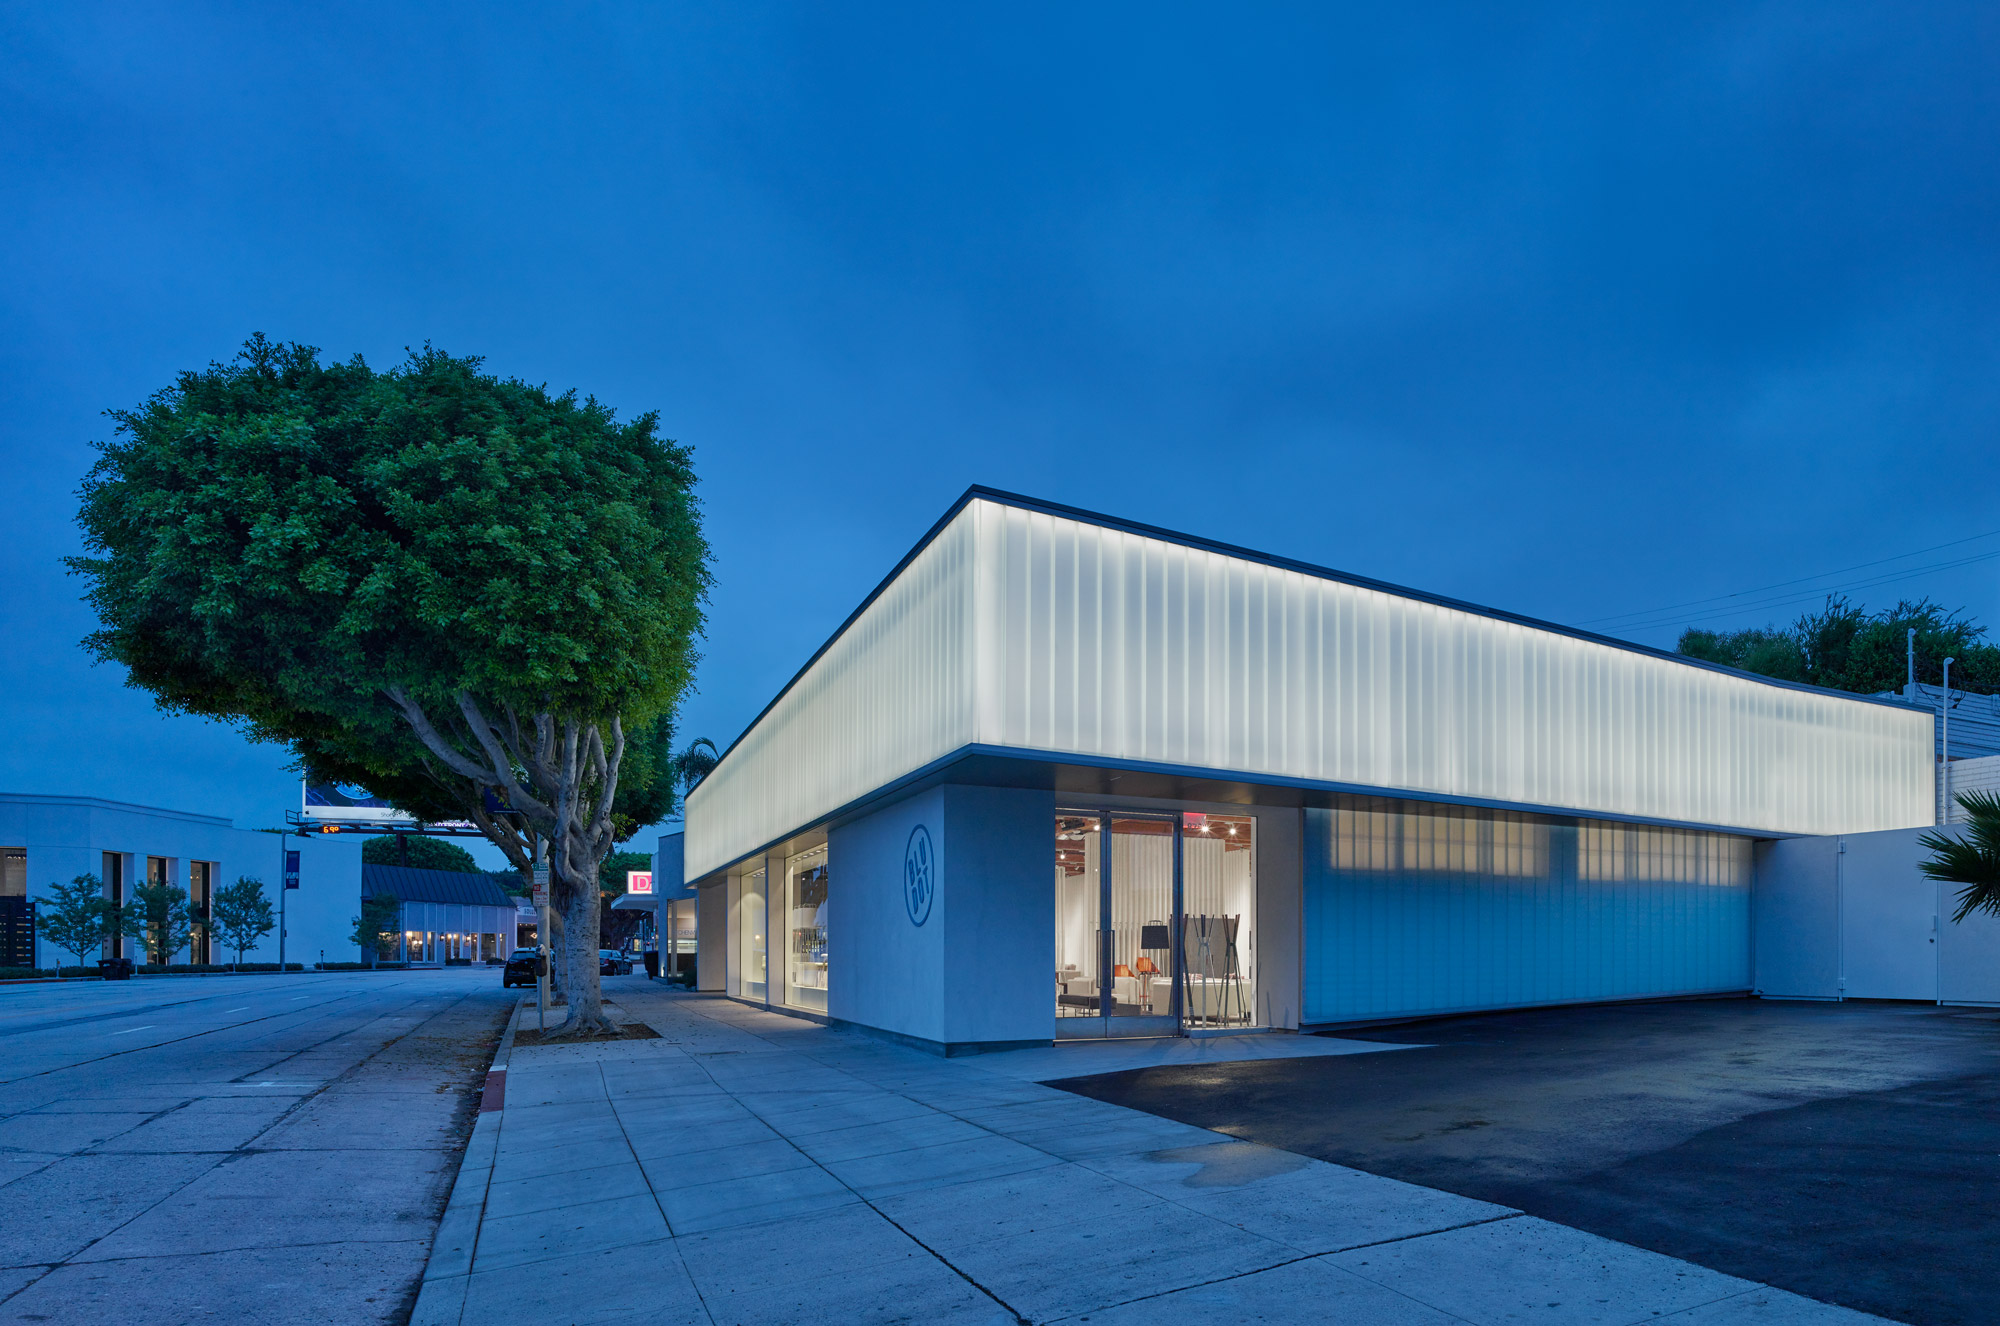 Blu Dot Showroom, West Hollywood, CA by Standard Architecture features a back-lit Bendheim channel glass rainscreen facade.